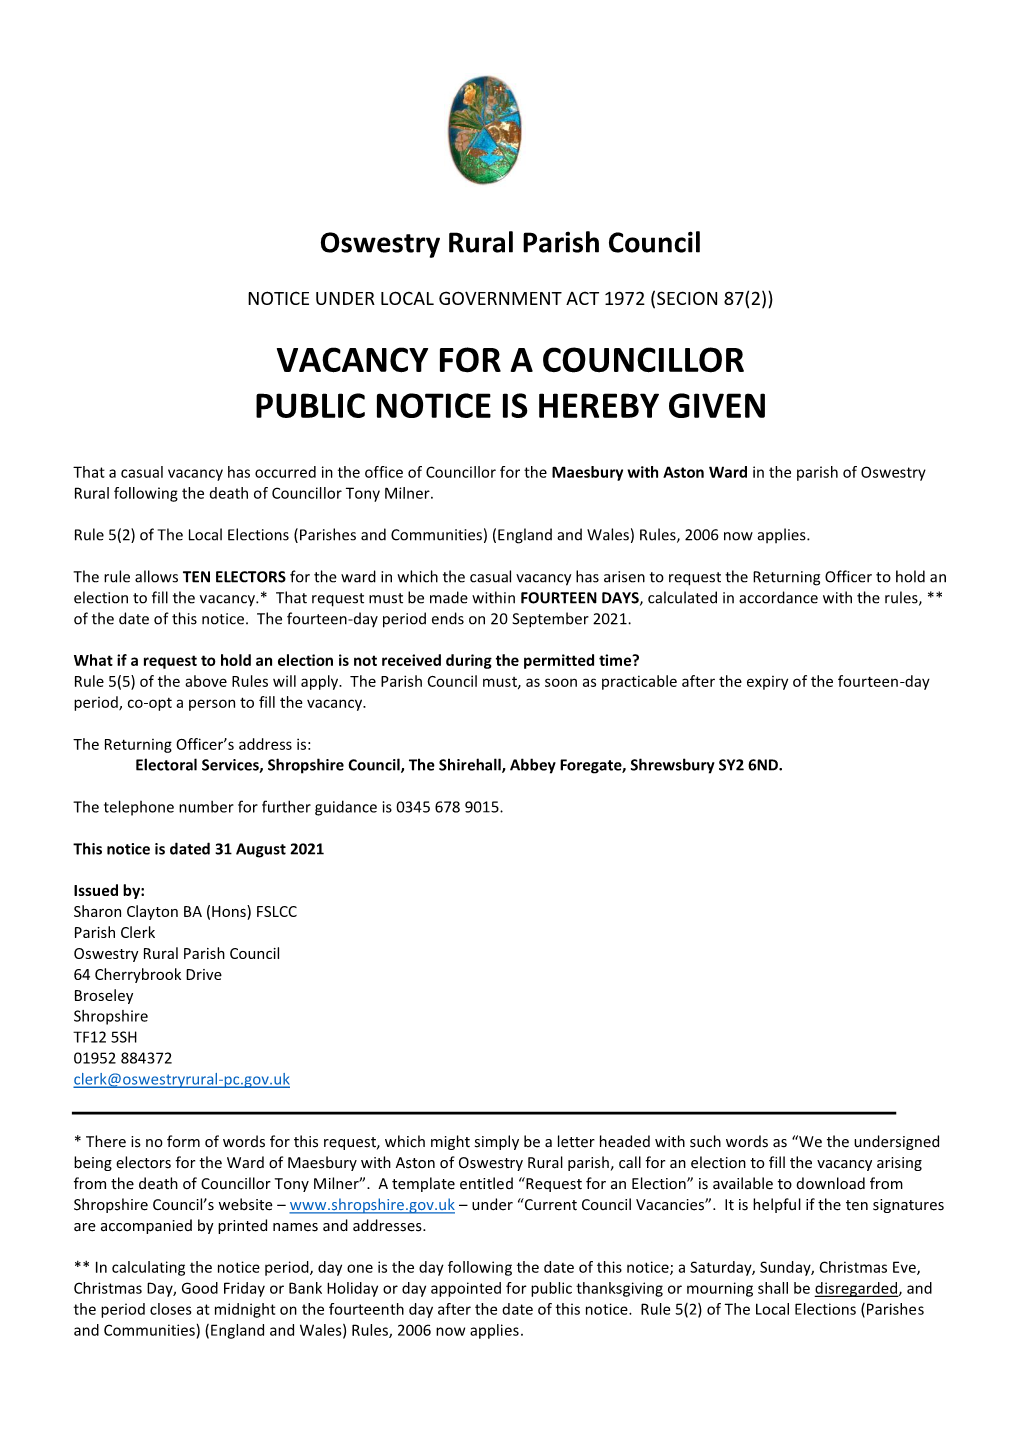 Vacancy for a Councillor Public Notice Is Hereby Given